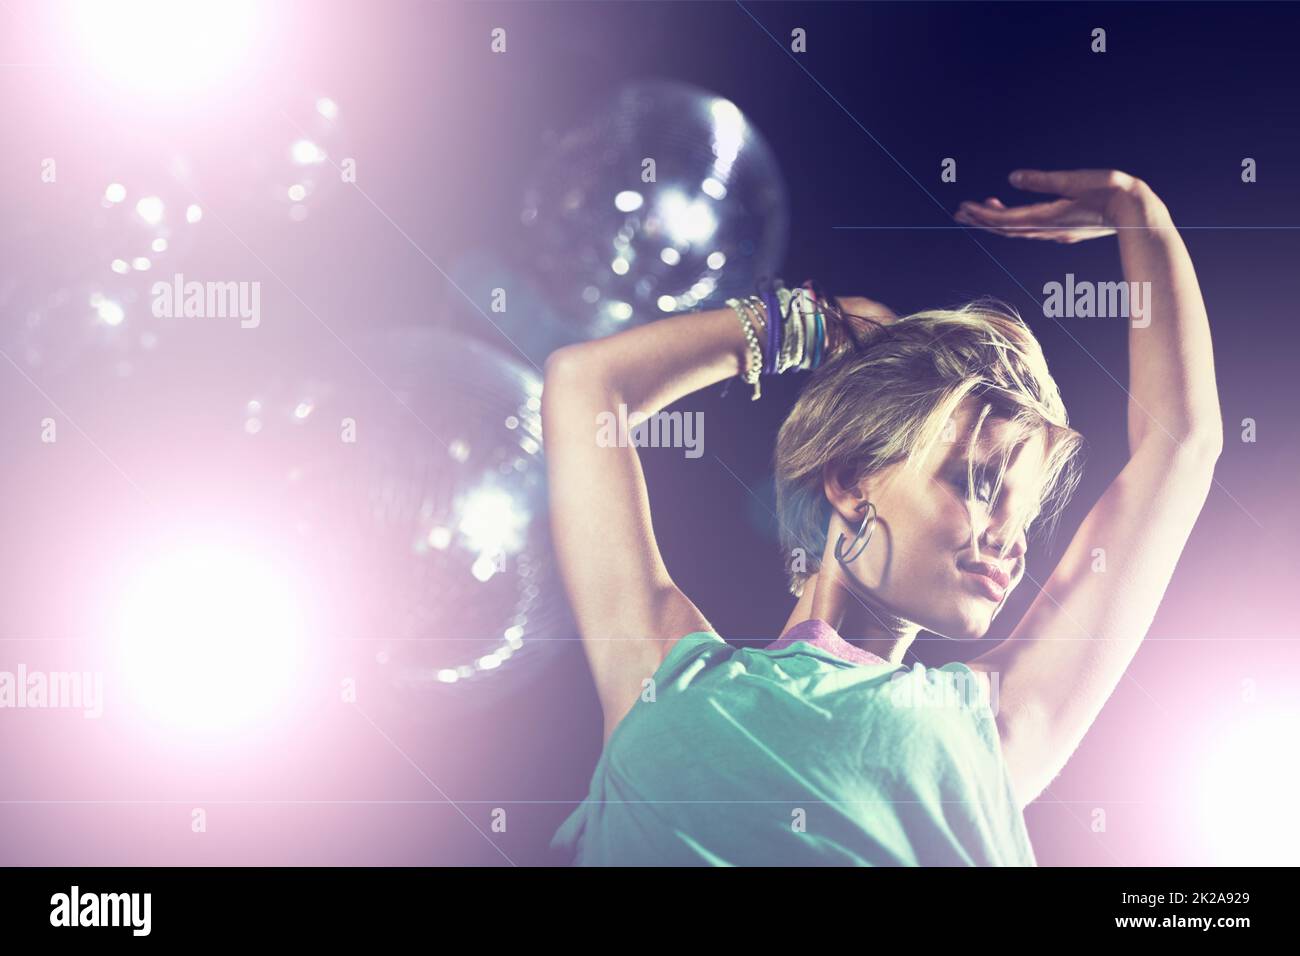 Partying the night away. Shot of an attractive and stylish young woman in a night club. Stock Photo